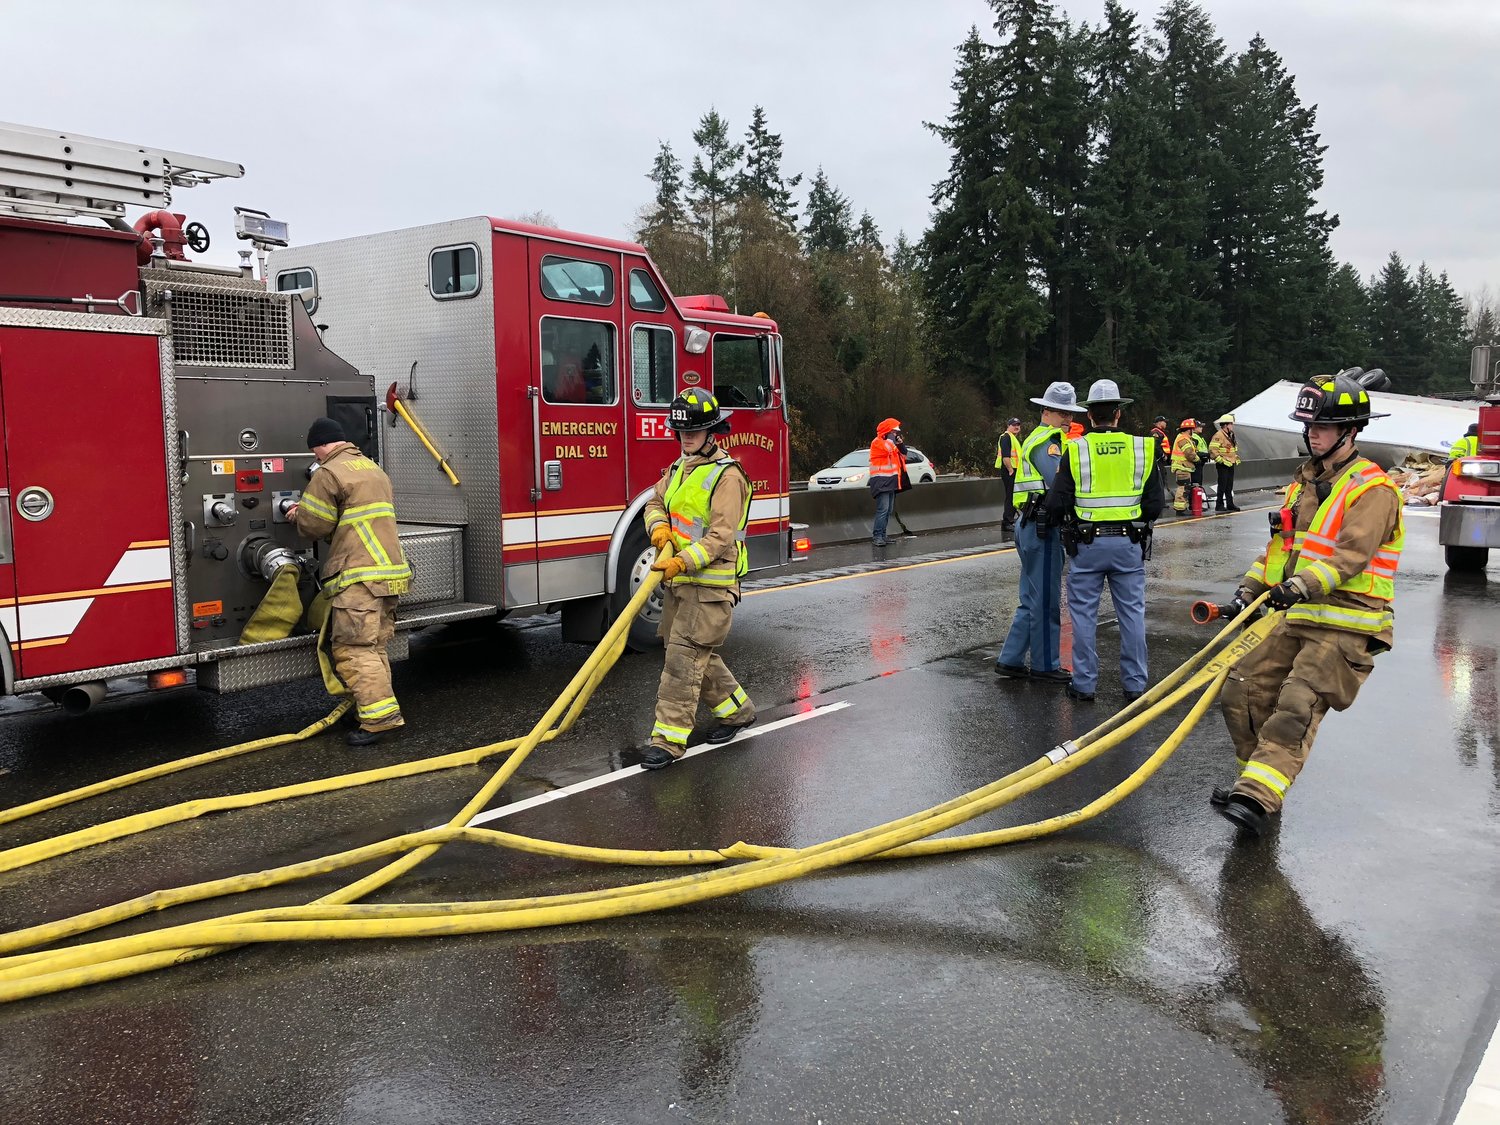 Fire crews roll out a hose as a precaution after an overturned semi truck that blocked all southbound lanes of I-5 traffic started smoking Wednesday morning.